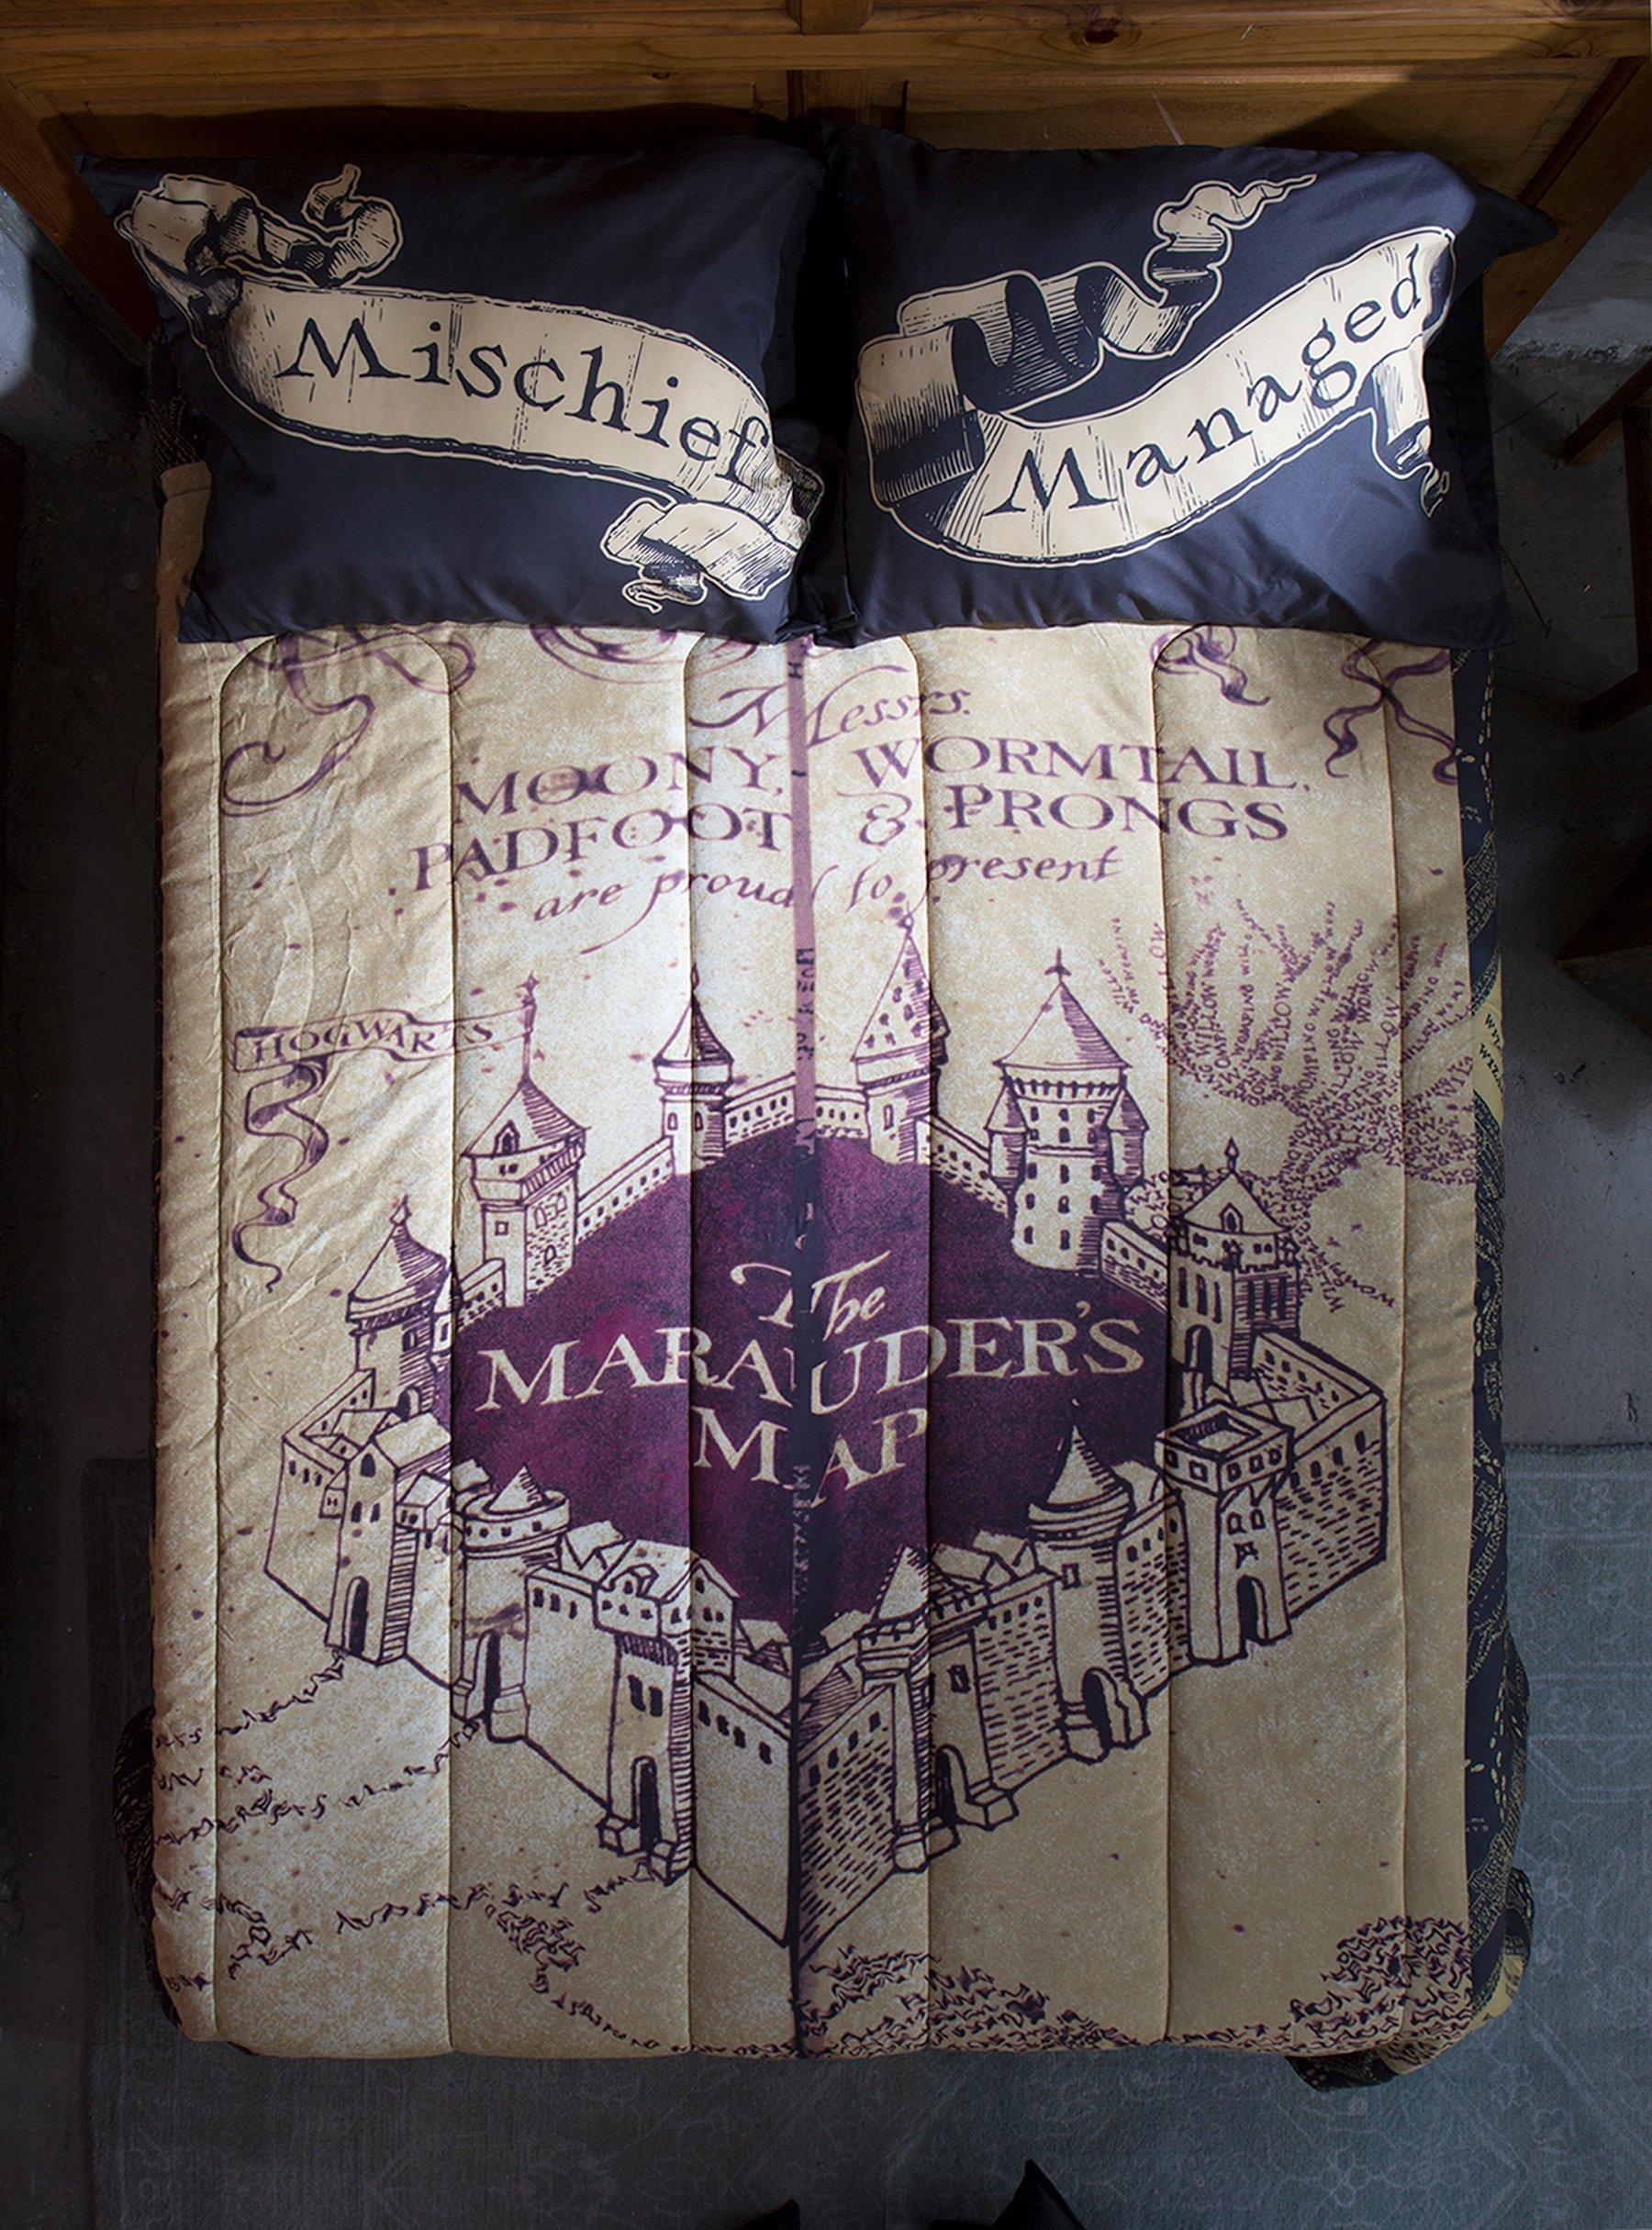 harry potter bed sheets - Google Search